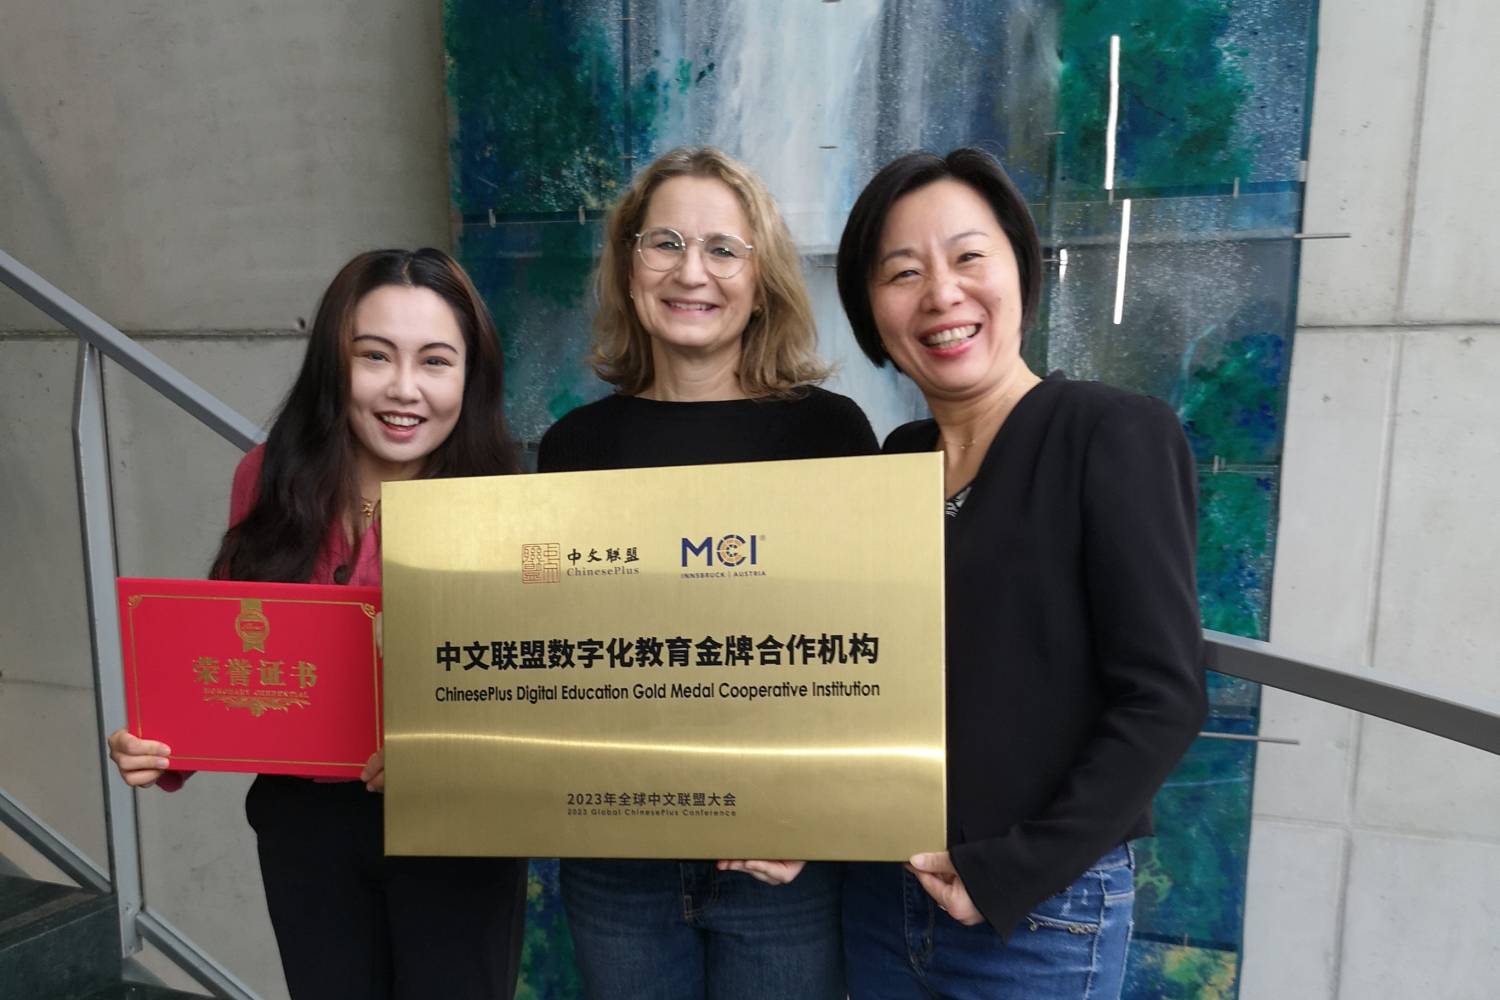 From left to right: Yiqiao Wang, Brigitte Huter (Head of MCI Language Center), Wei Manske-Wang (Head of MCI China Center) ©MCI